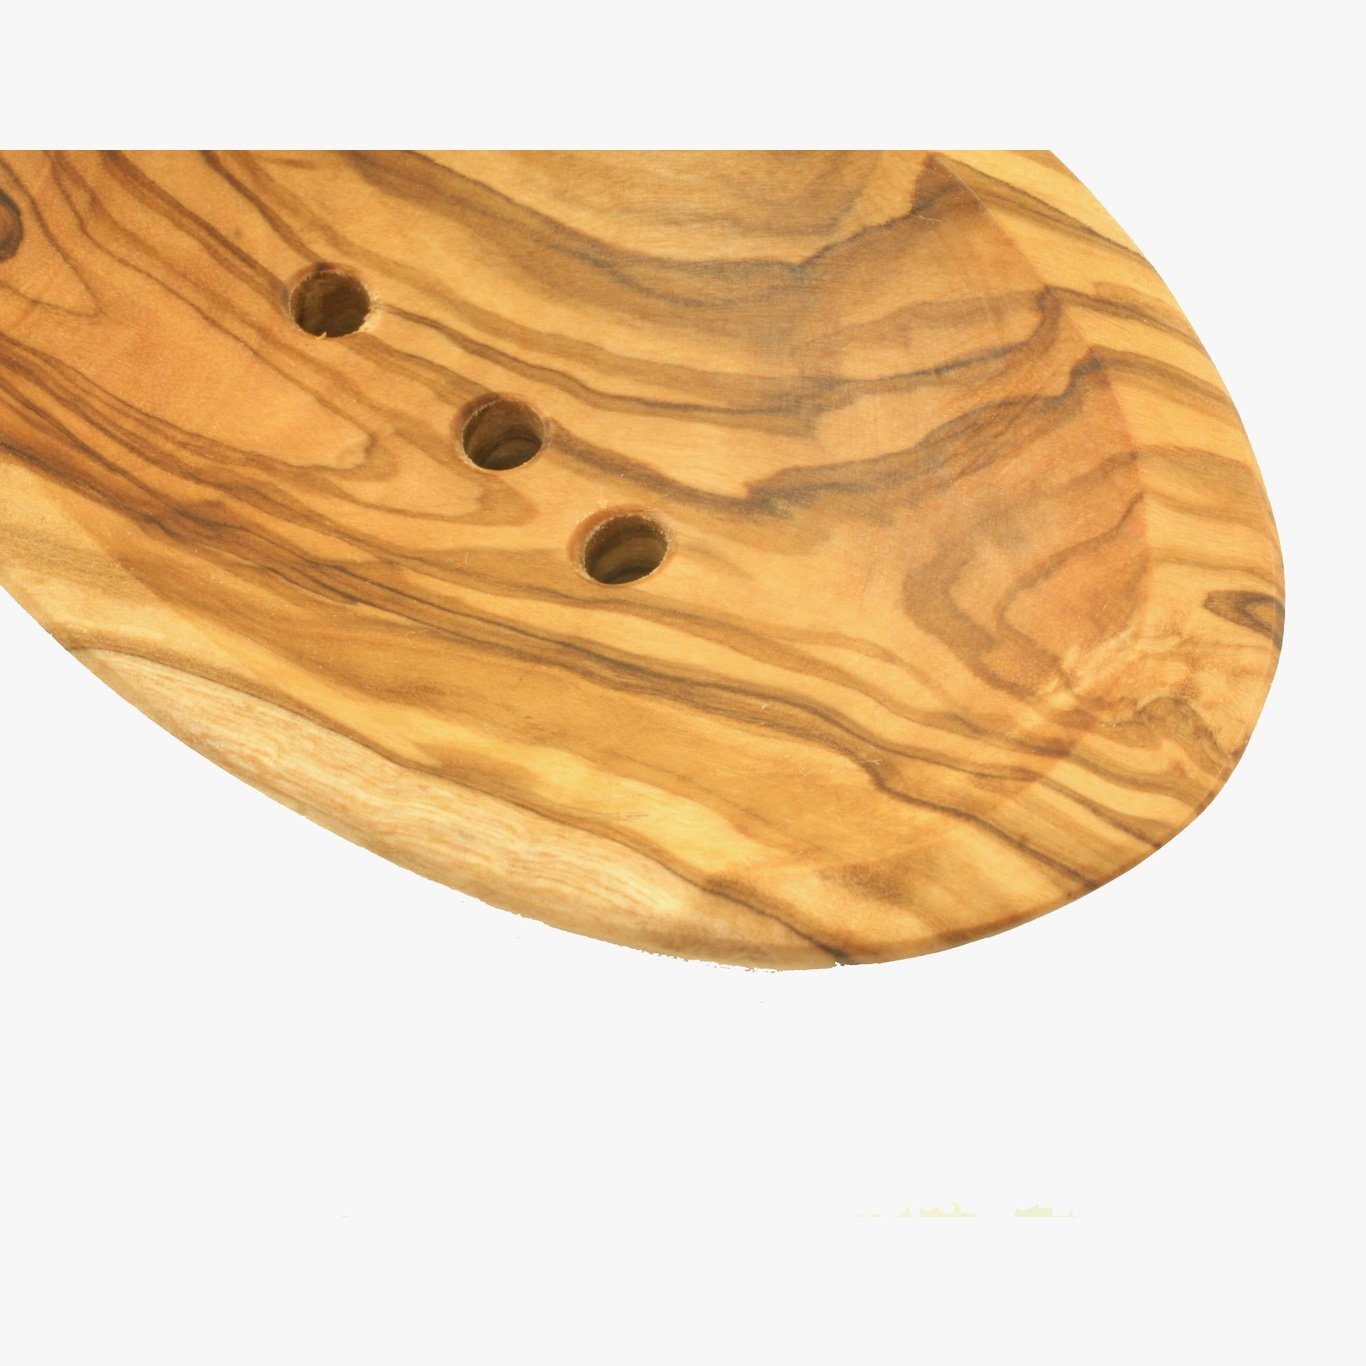 Oval soap dish approx. 12 — 14 cm made of olive wood with groove